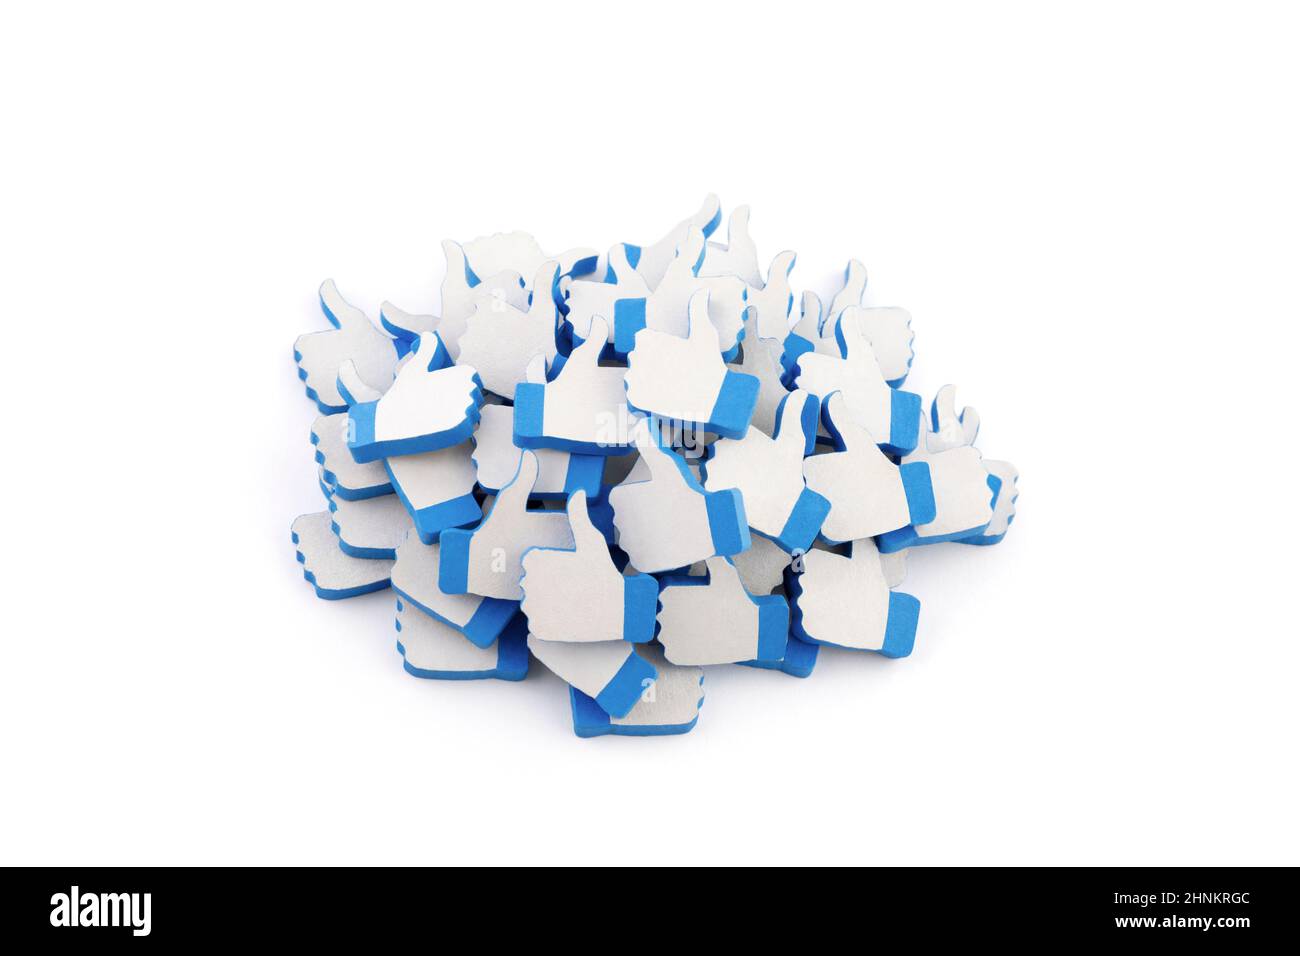 Many blue like thumb up icons on white background with clipping path. Social media concept Stock Photo